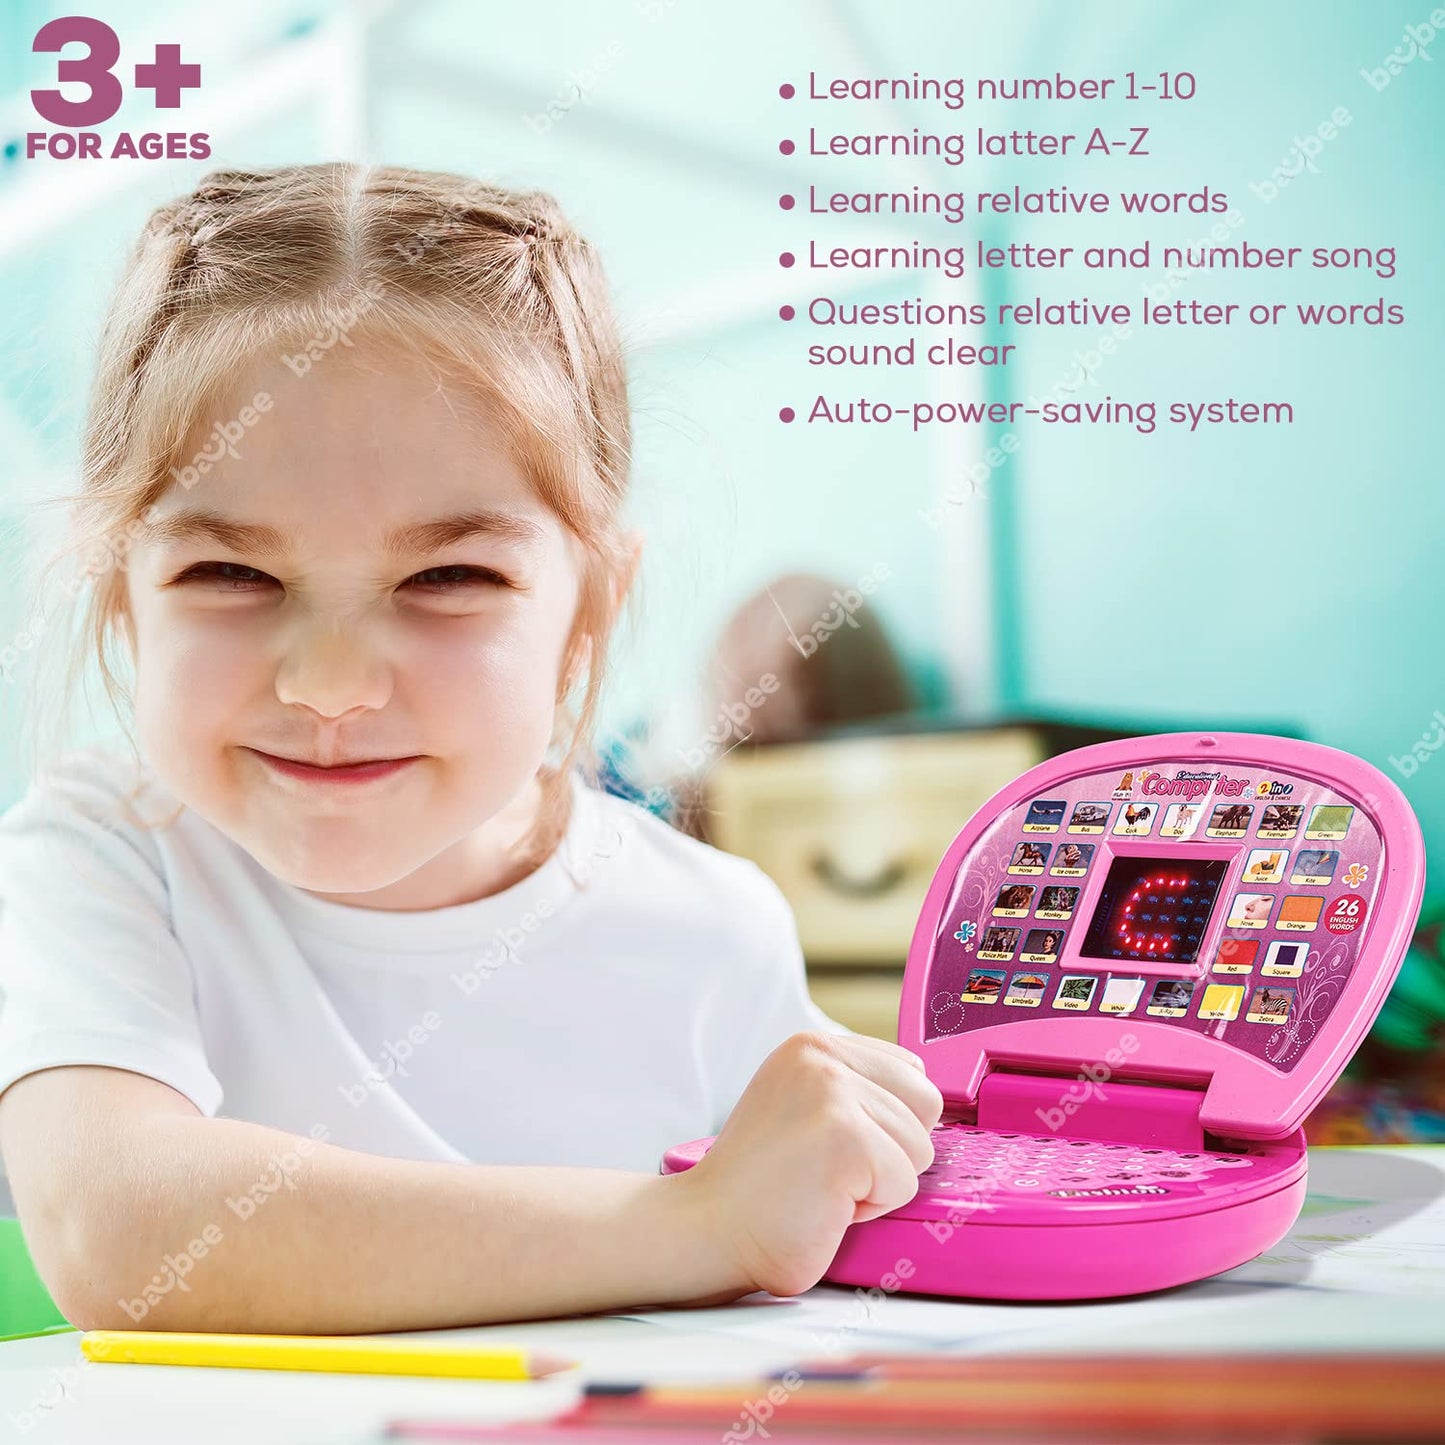 BAYBEE Electronic Educational Computer Laptop Toys for Kids.